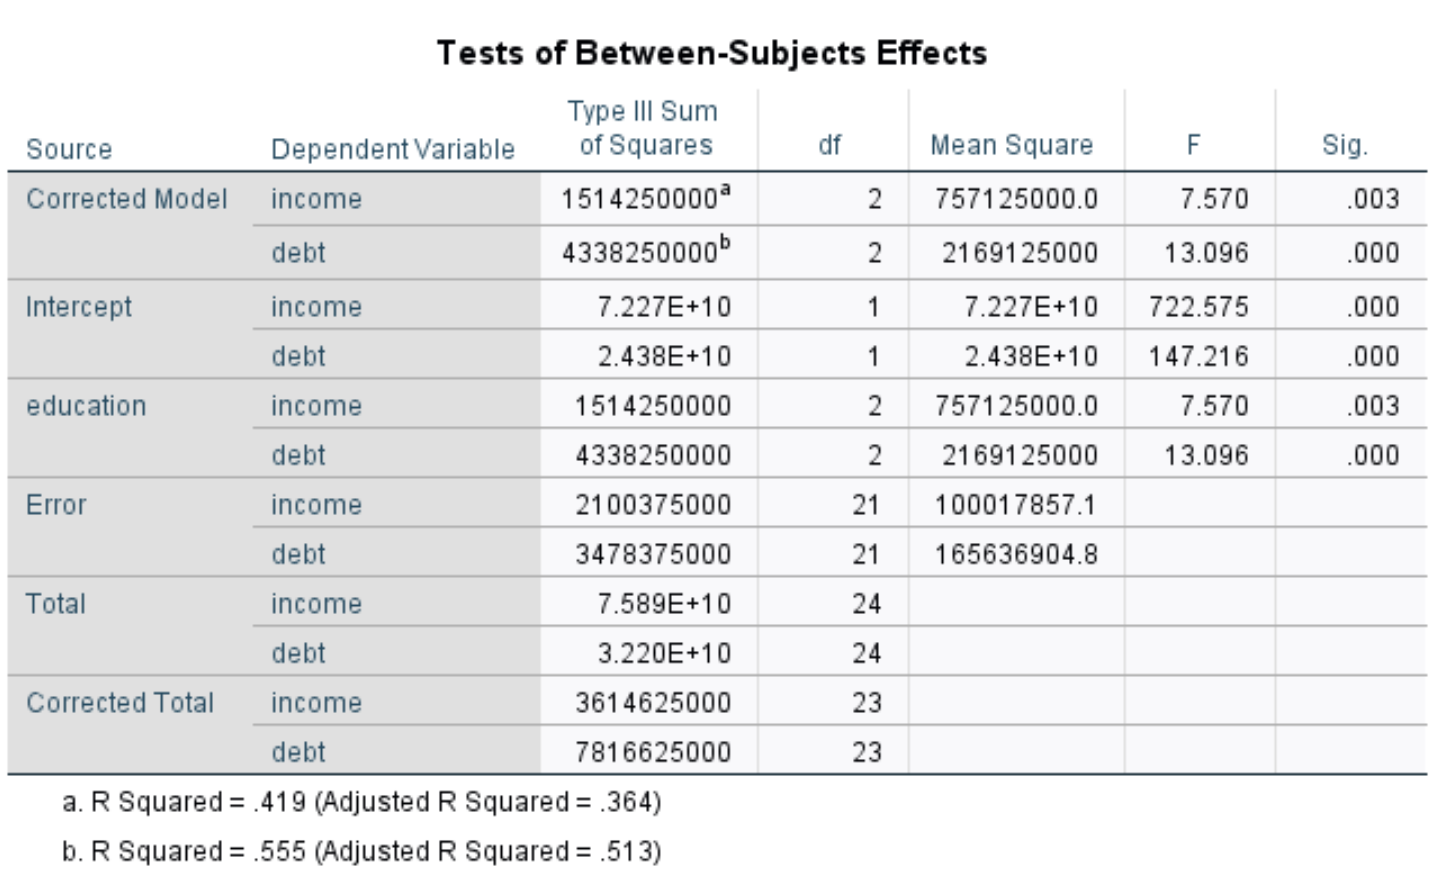 Output of MANOVA in SPSS